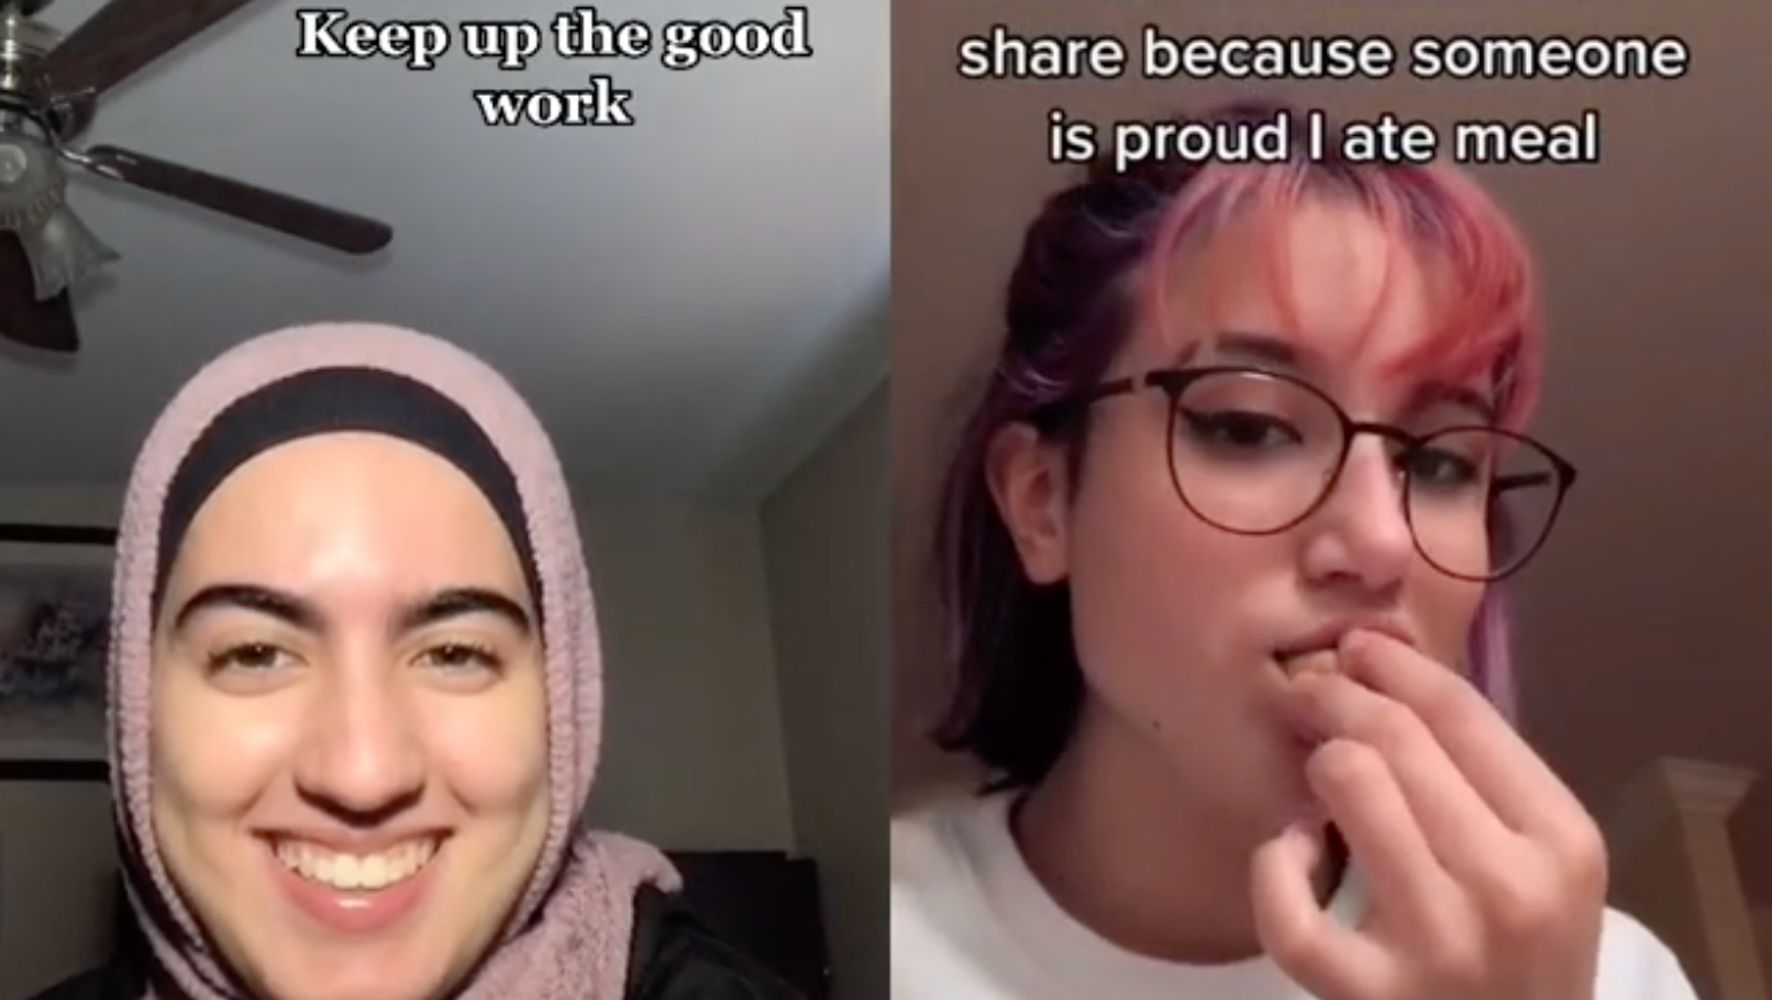 'Let's Eat Together' Videos On TikTok Help Teens Struggling With Eating Disorders